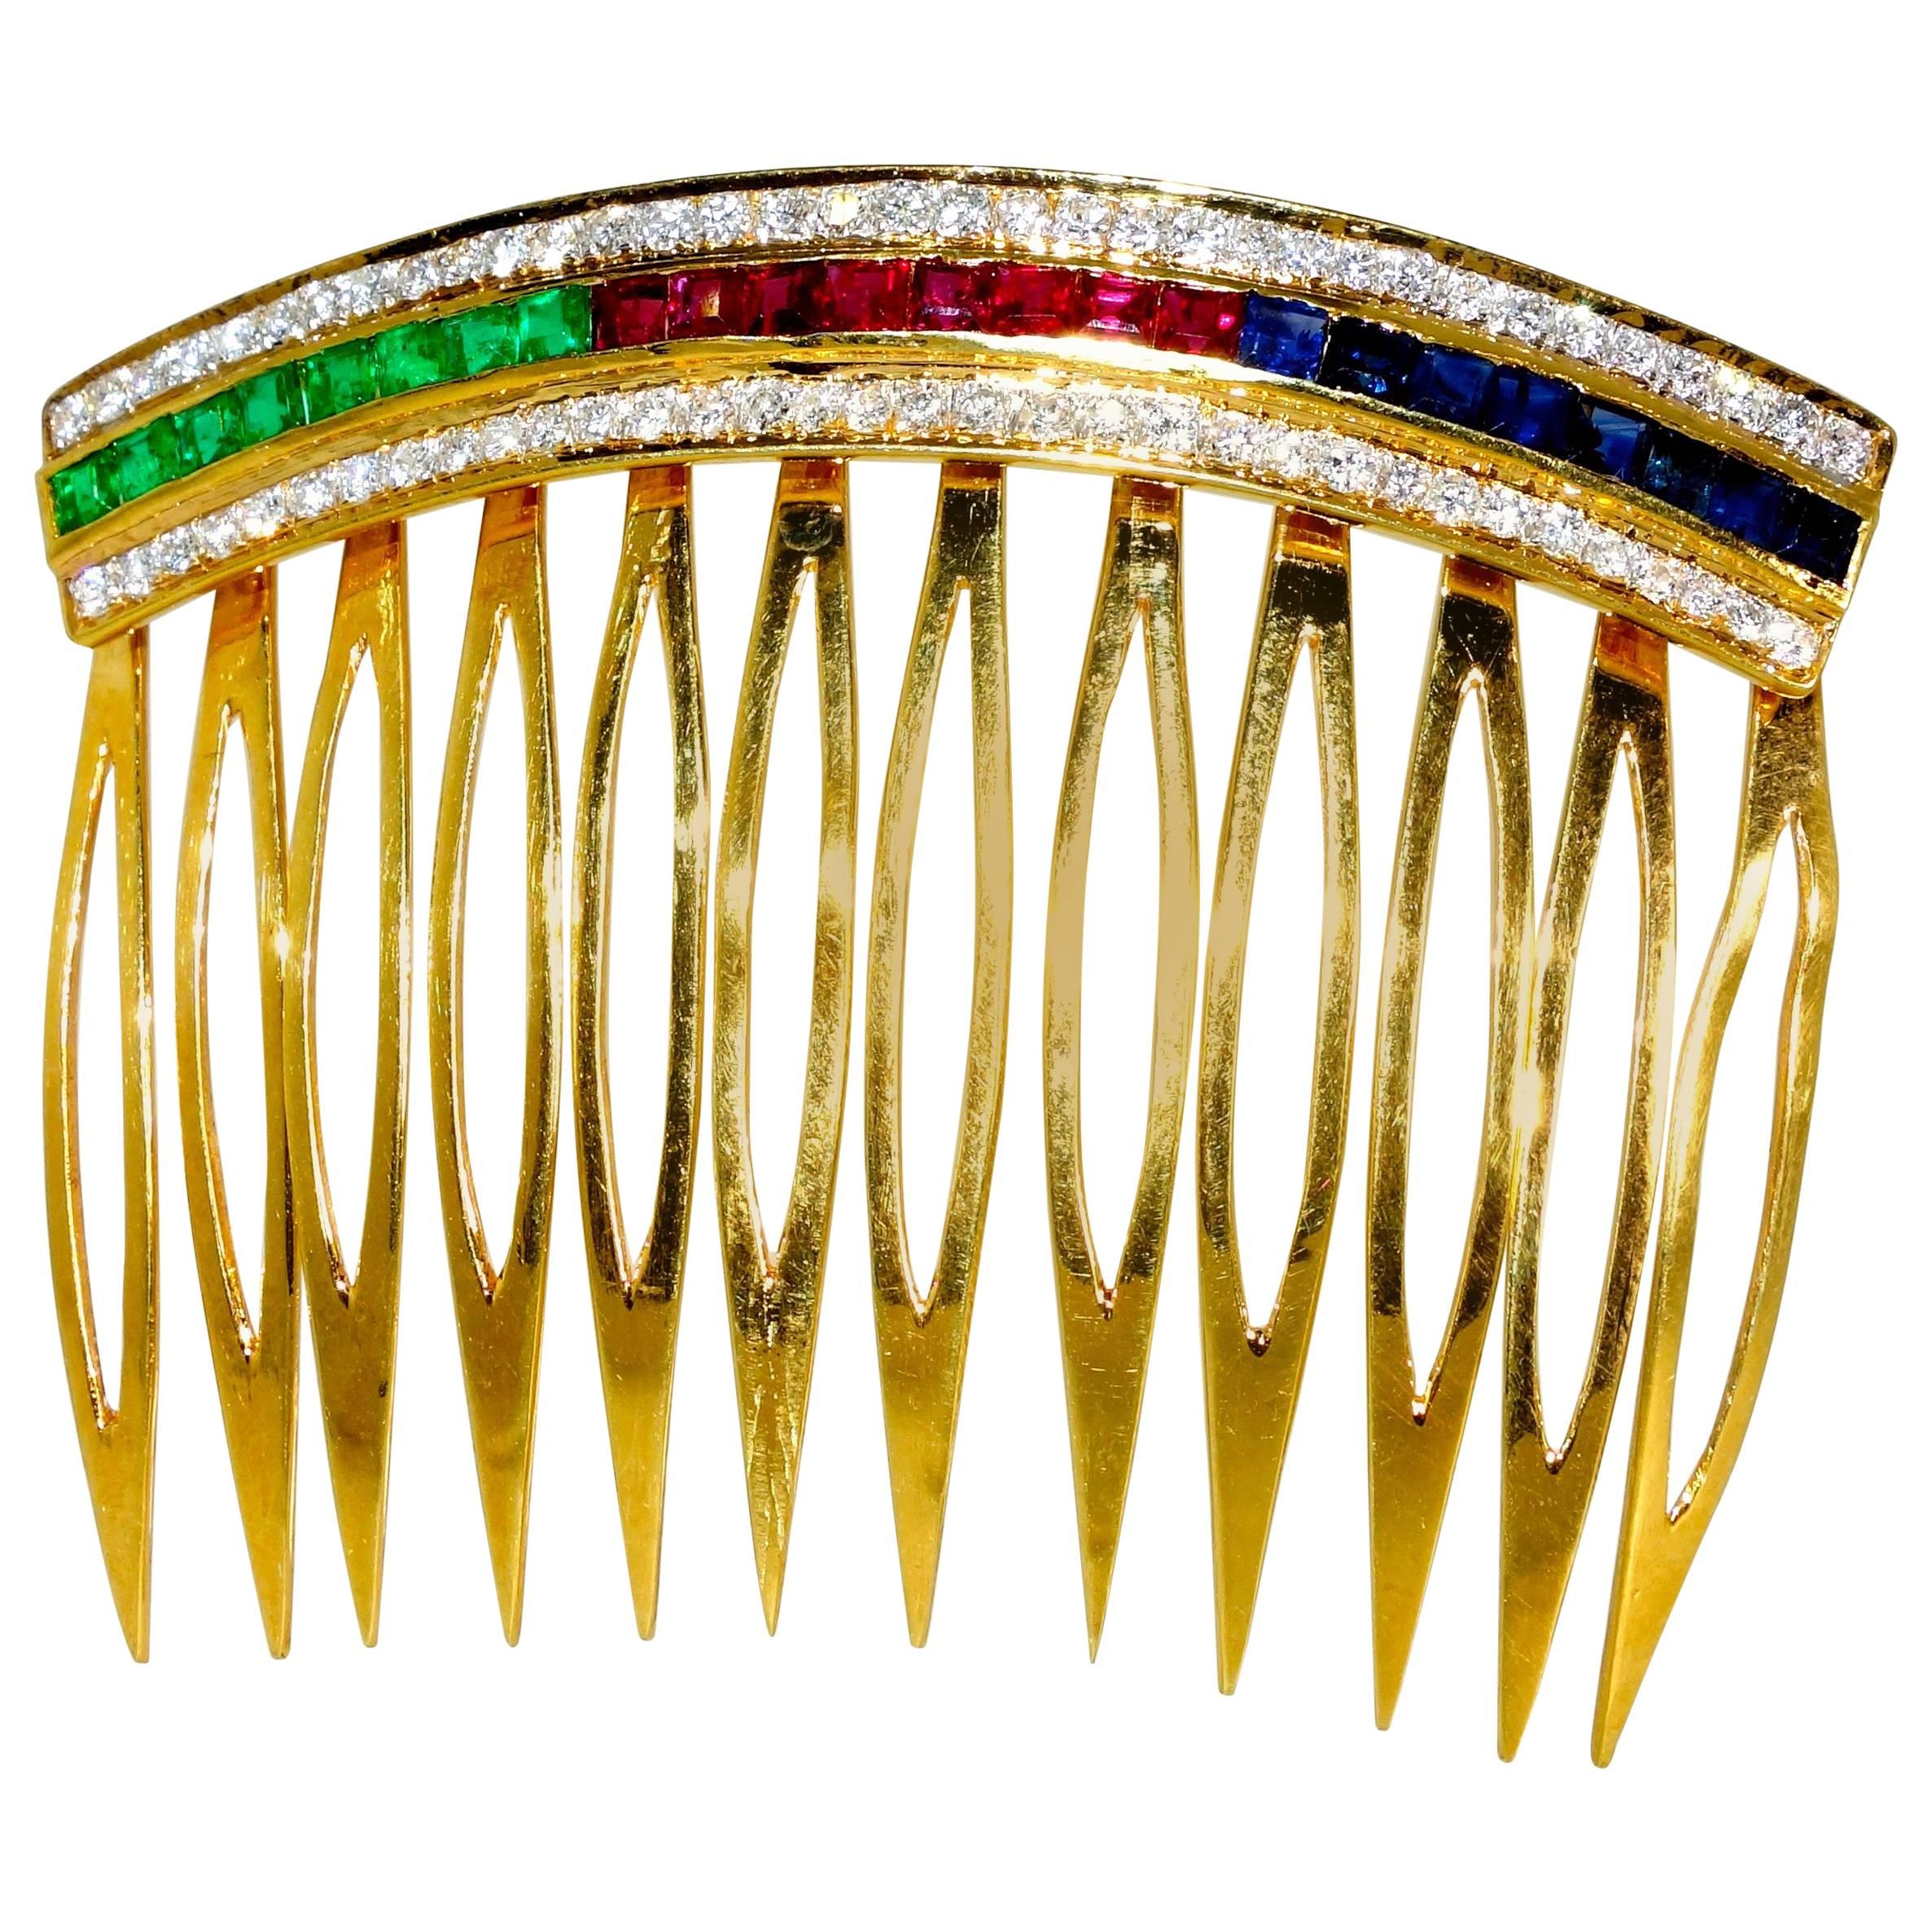   Hair Barrette in Gold with Rubies, Diamonds, Sapphires and Emeralds.